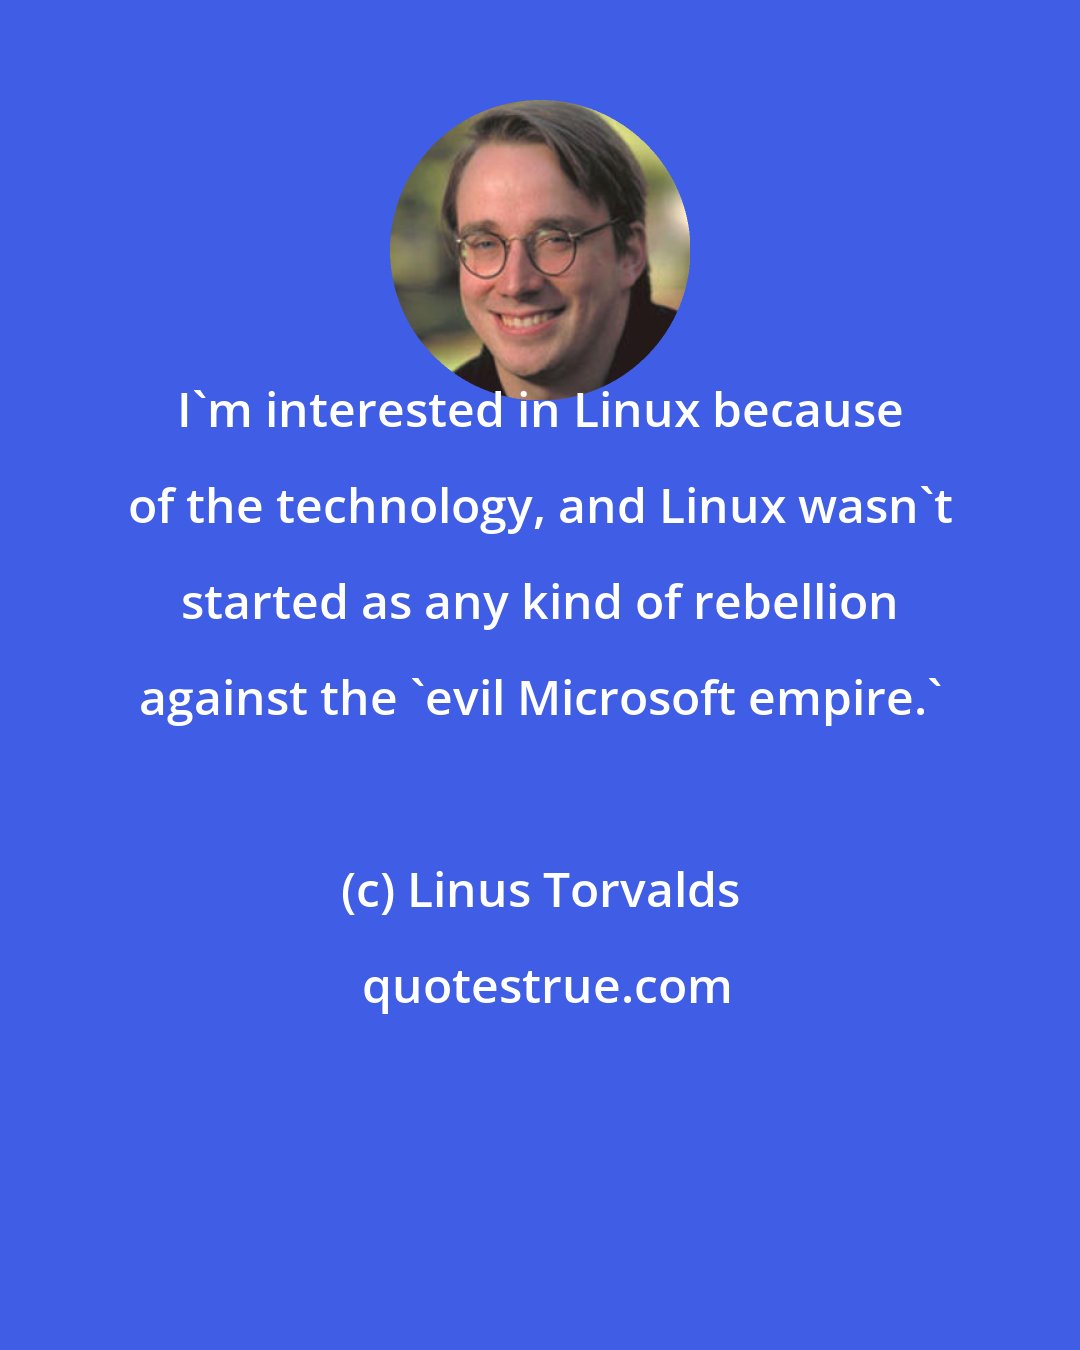 Linus Torvalds: I'm interested in Linux because of the technology, and Linux wasn't started as any kind of rebellion against the 'evil Microsoft empire.'